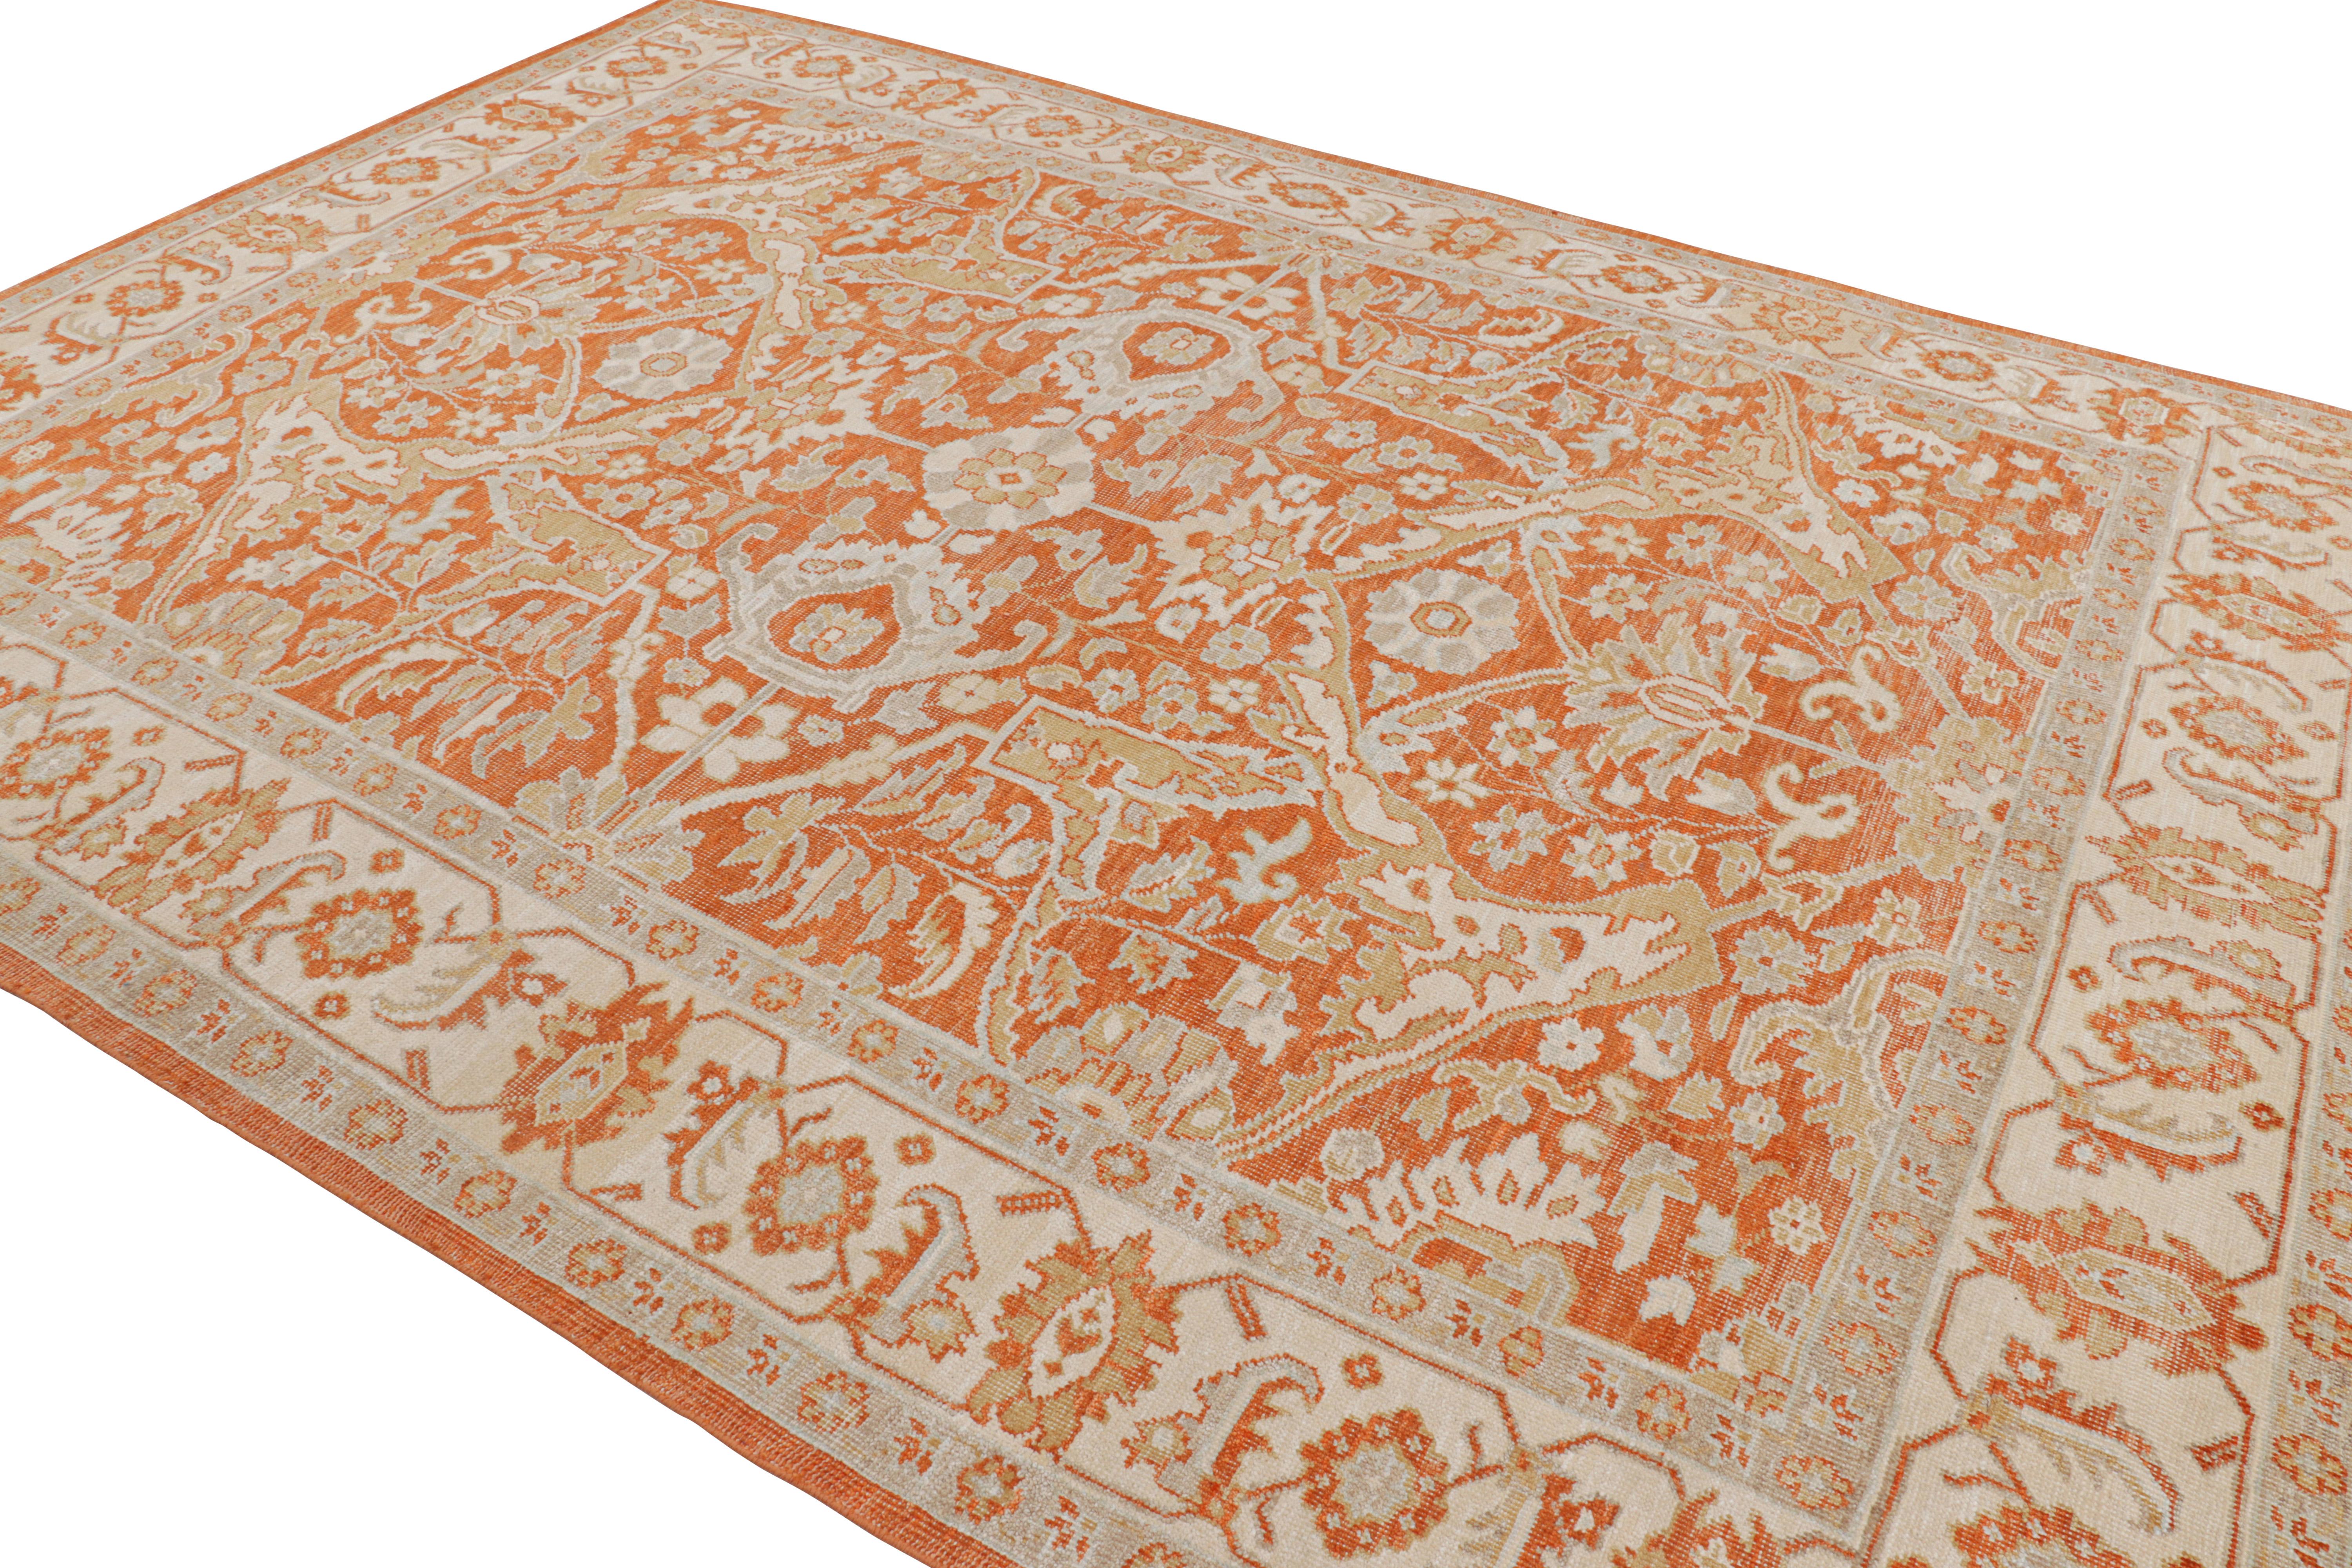 Indian Rug & Kilim’s Oushak Style Rug in Orange with Floral Patterns in Beige and Gold For Sale